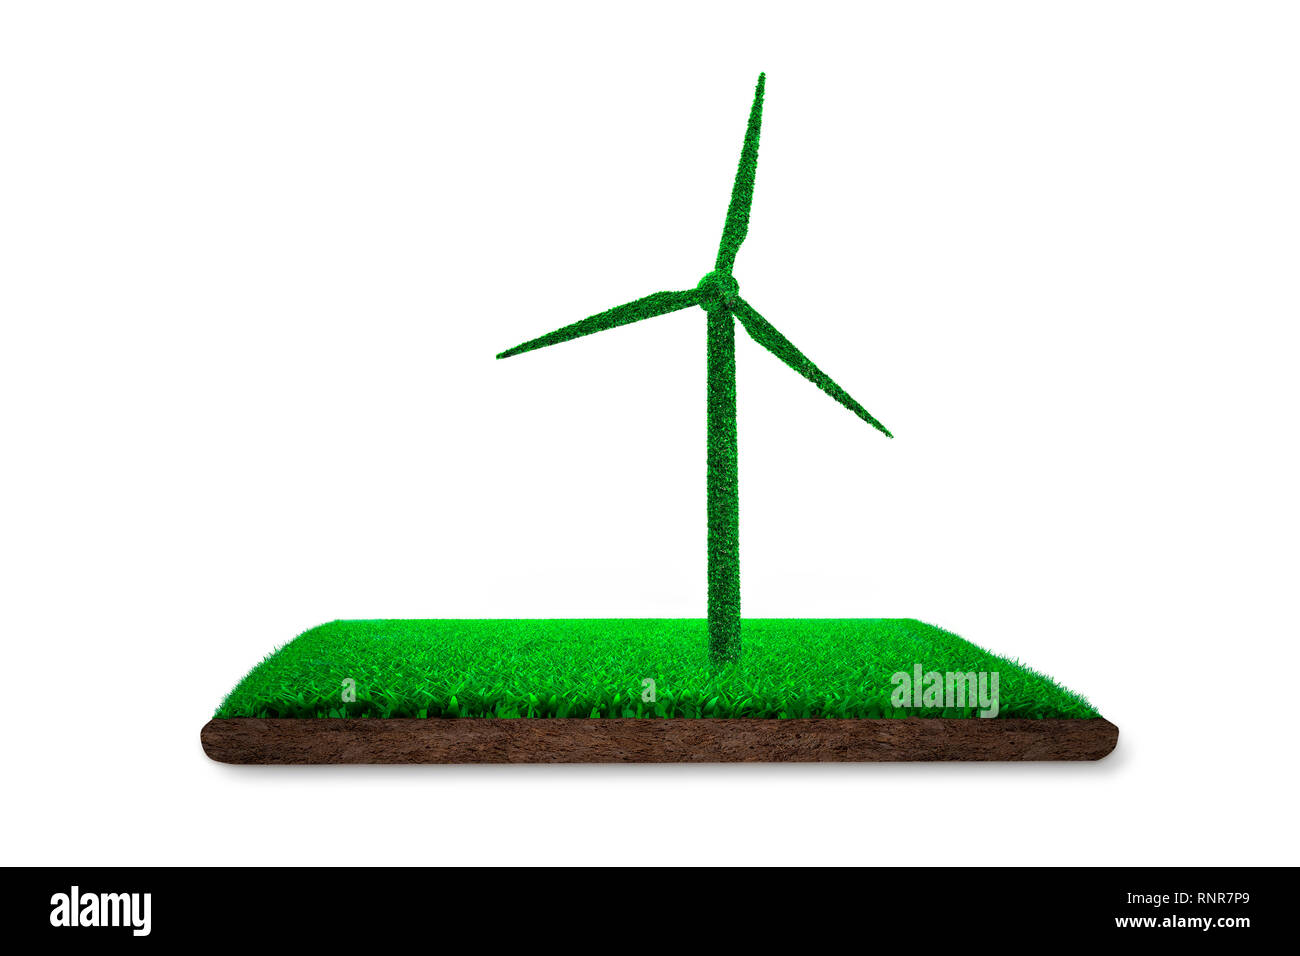 Concept of ECO, green energy and circular economy, green grass in wind turbine shape on grass land with mud, isolated on white background, 3D illustra Stock Photo